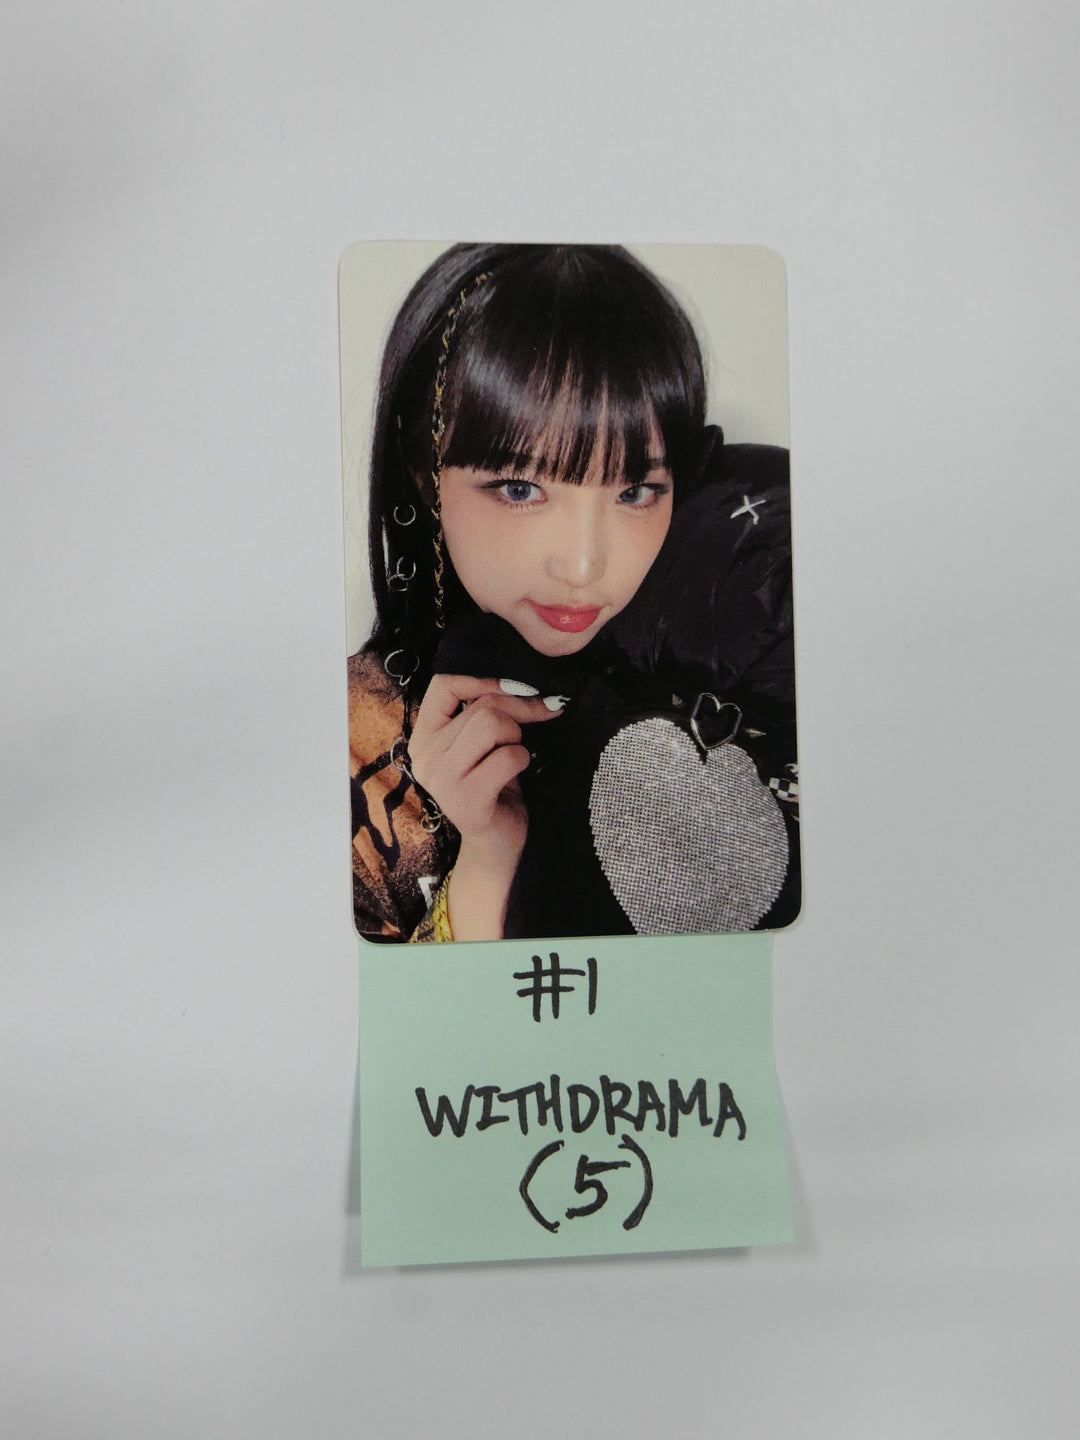 YENA "ˣ‿ˣ (SMiLEY)" - Withdrama Fansign Event Phtocard